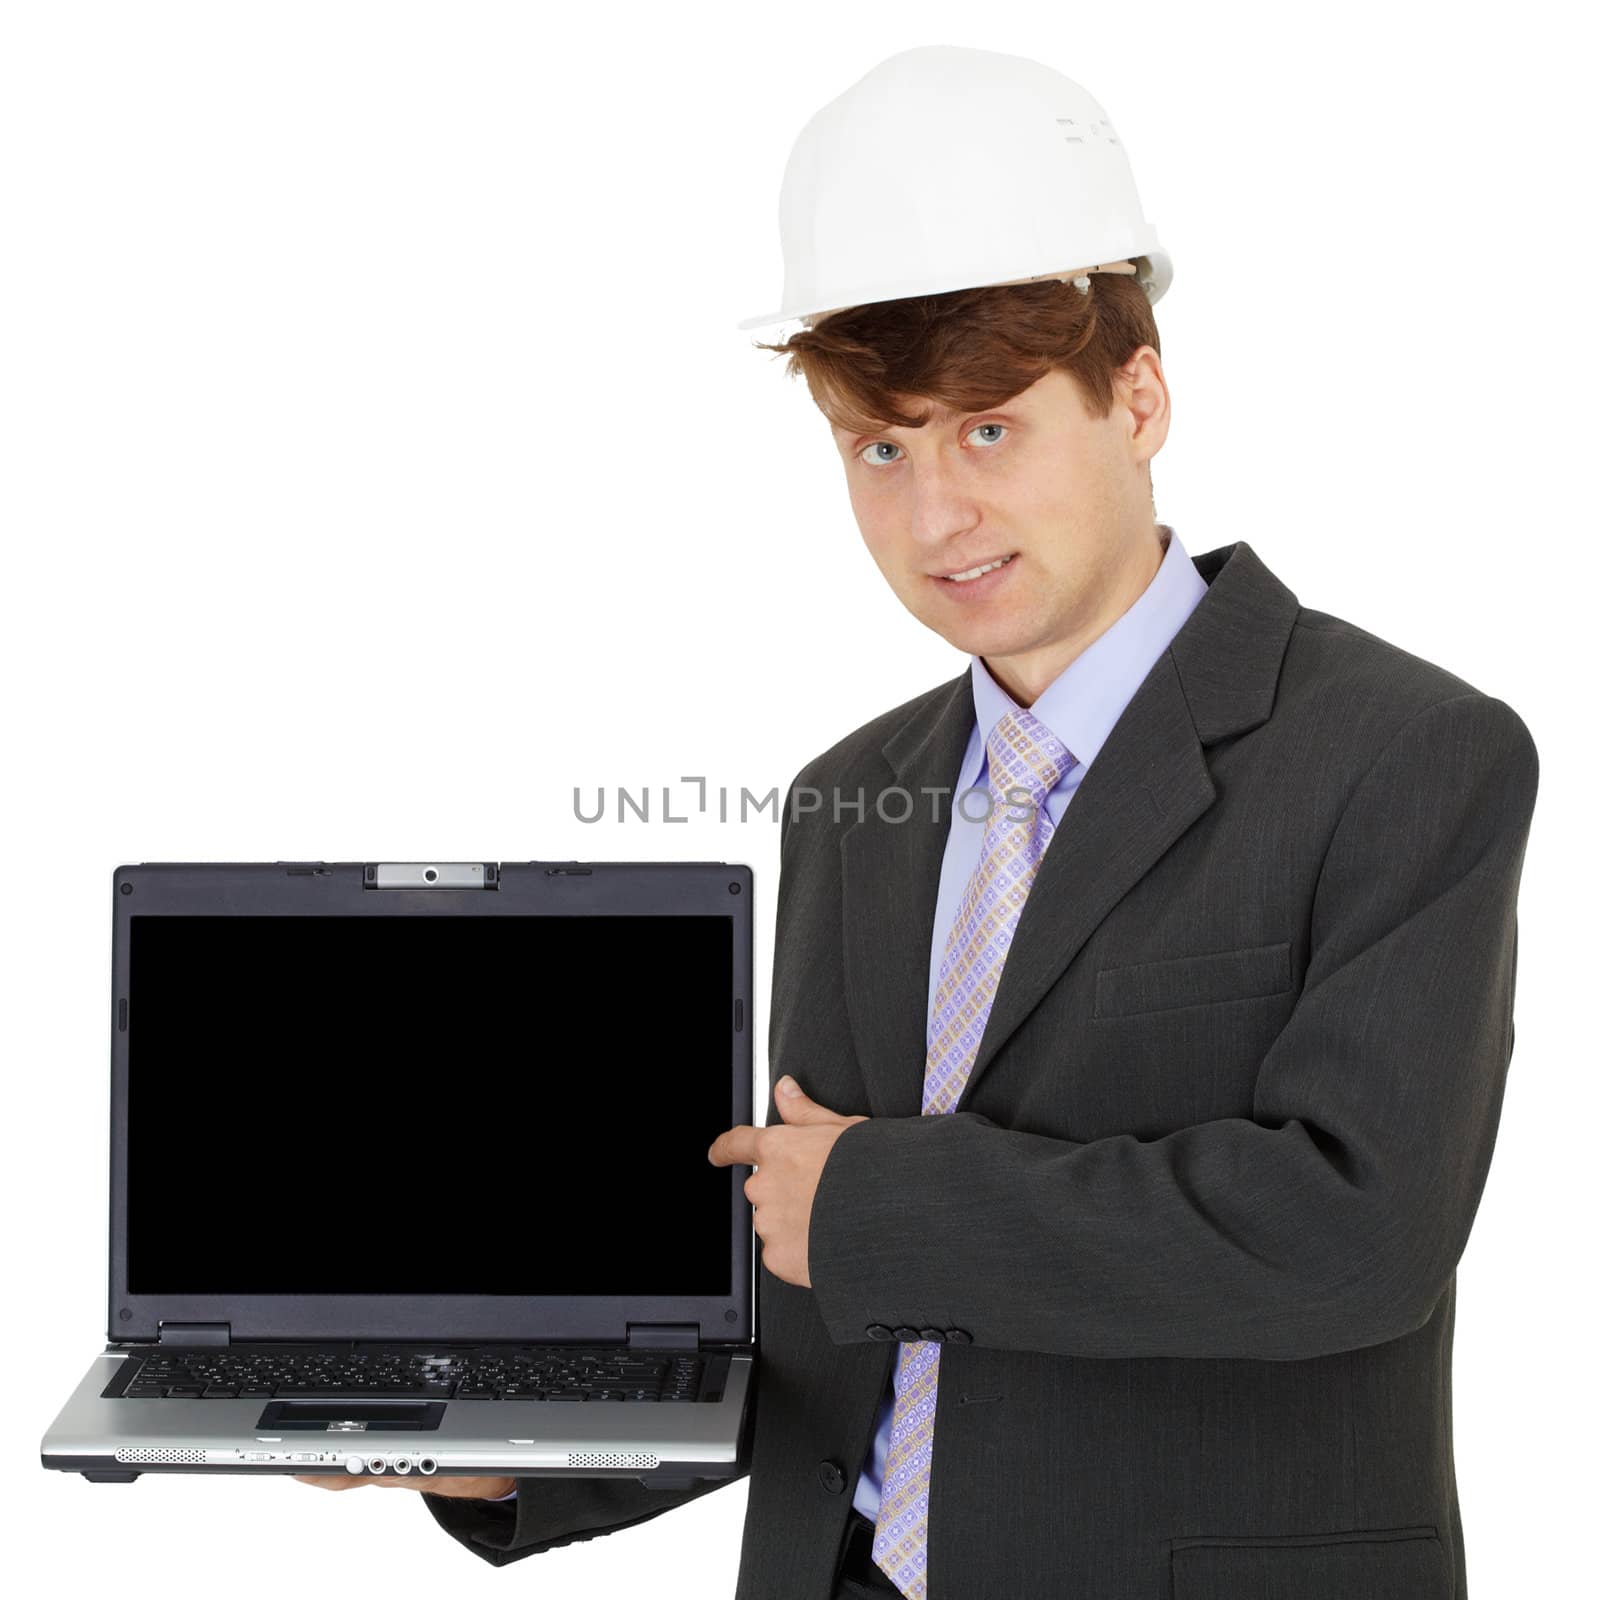 Engineer demonstrates a laptop screen is isolated on a white background